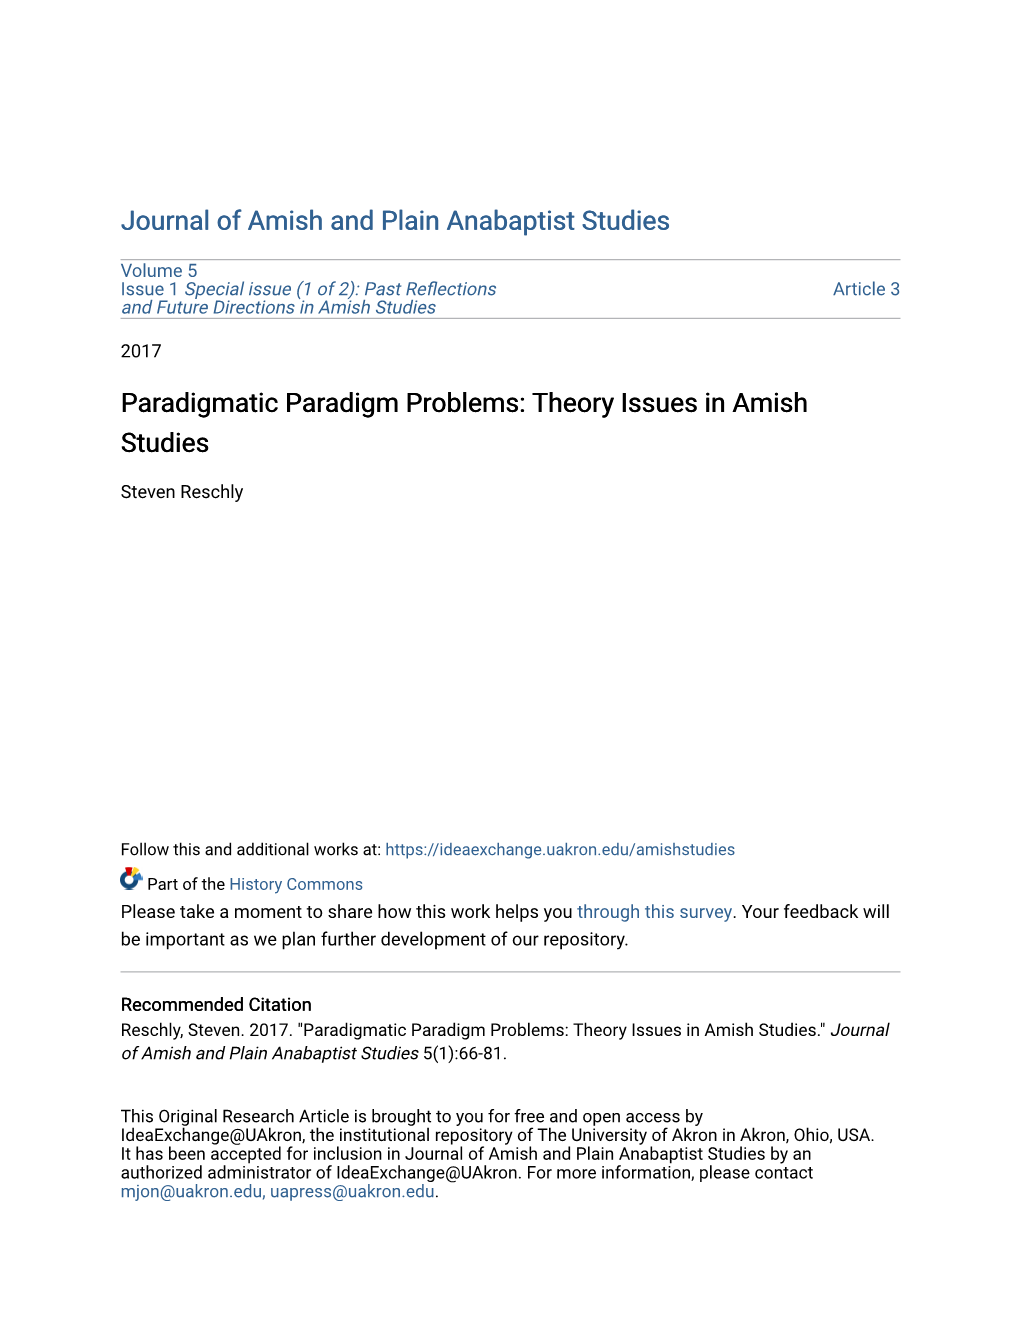 Theory Issues in Amish Studies